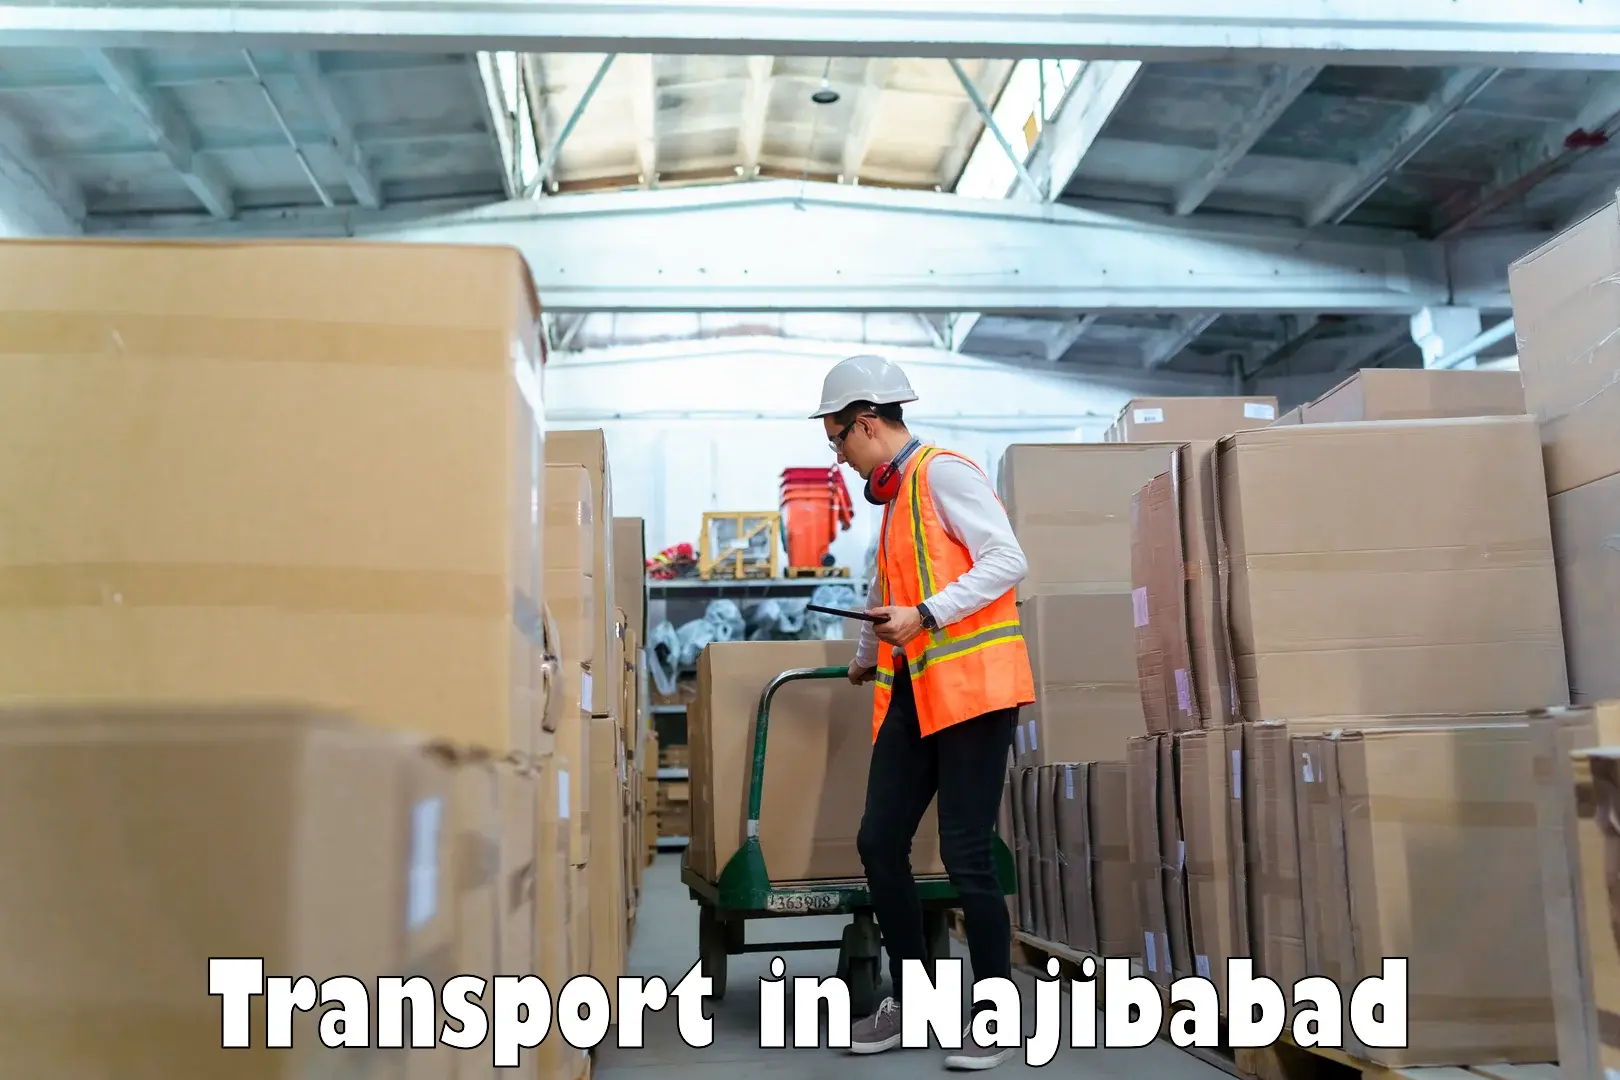 Vehicle transport services in Najibabad